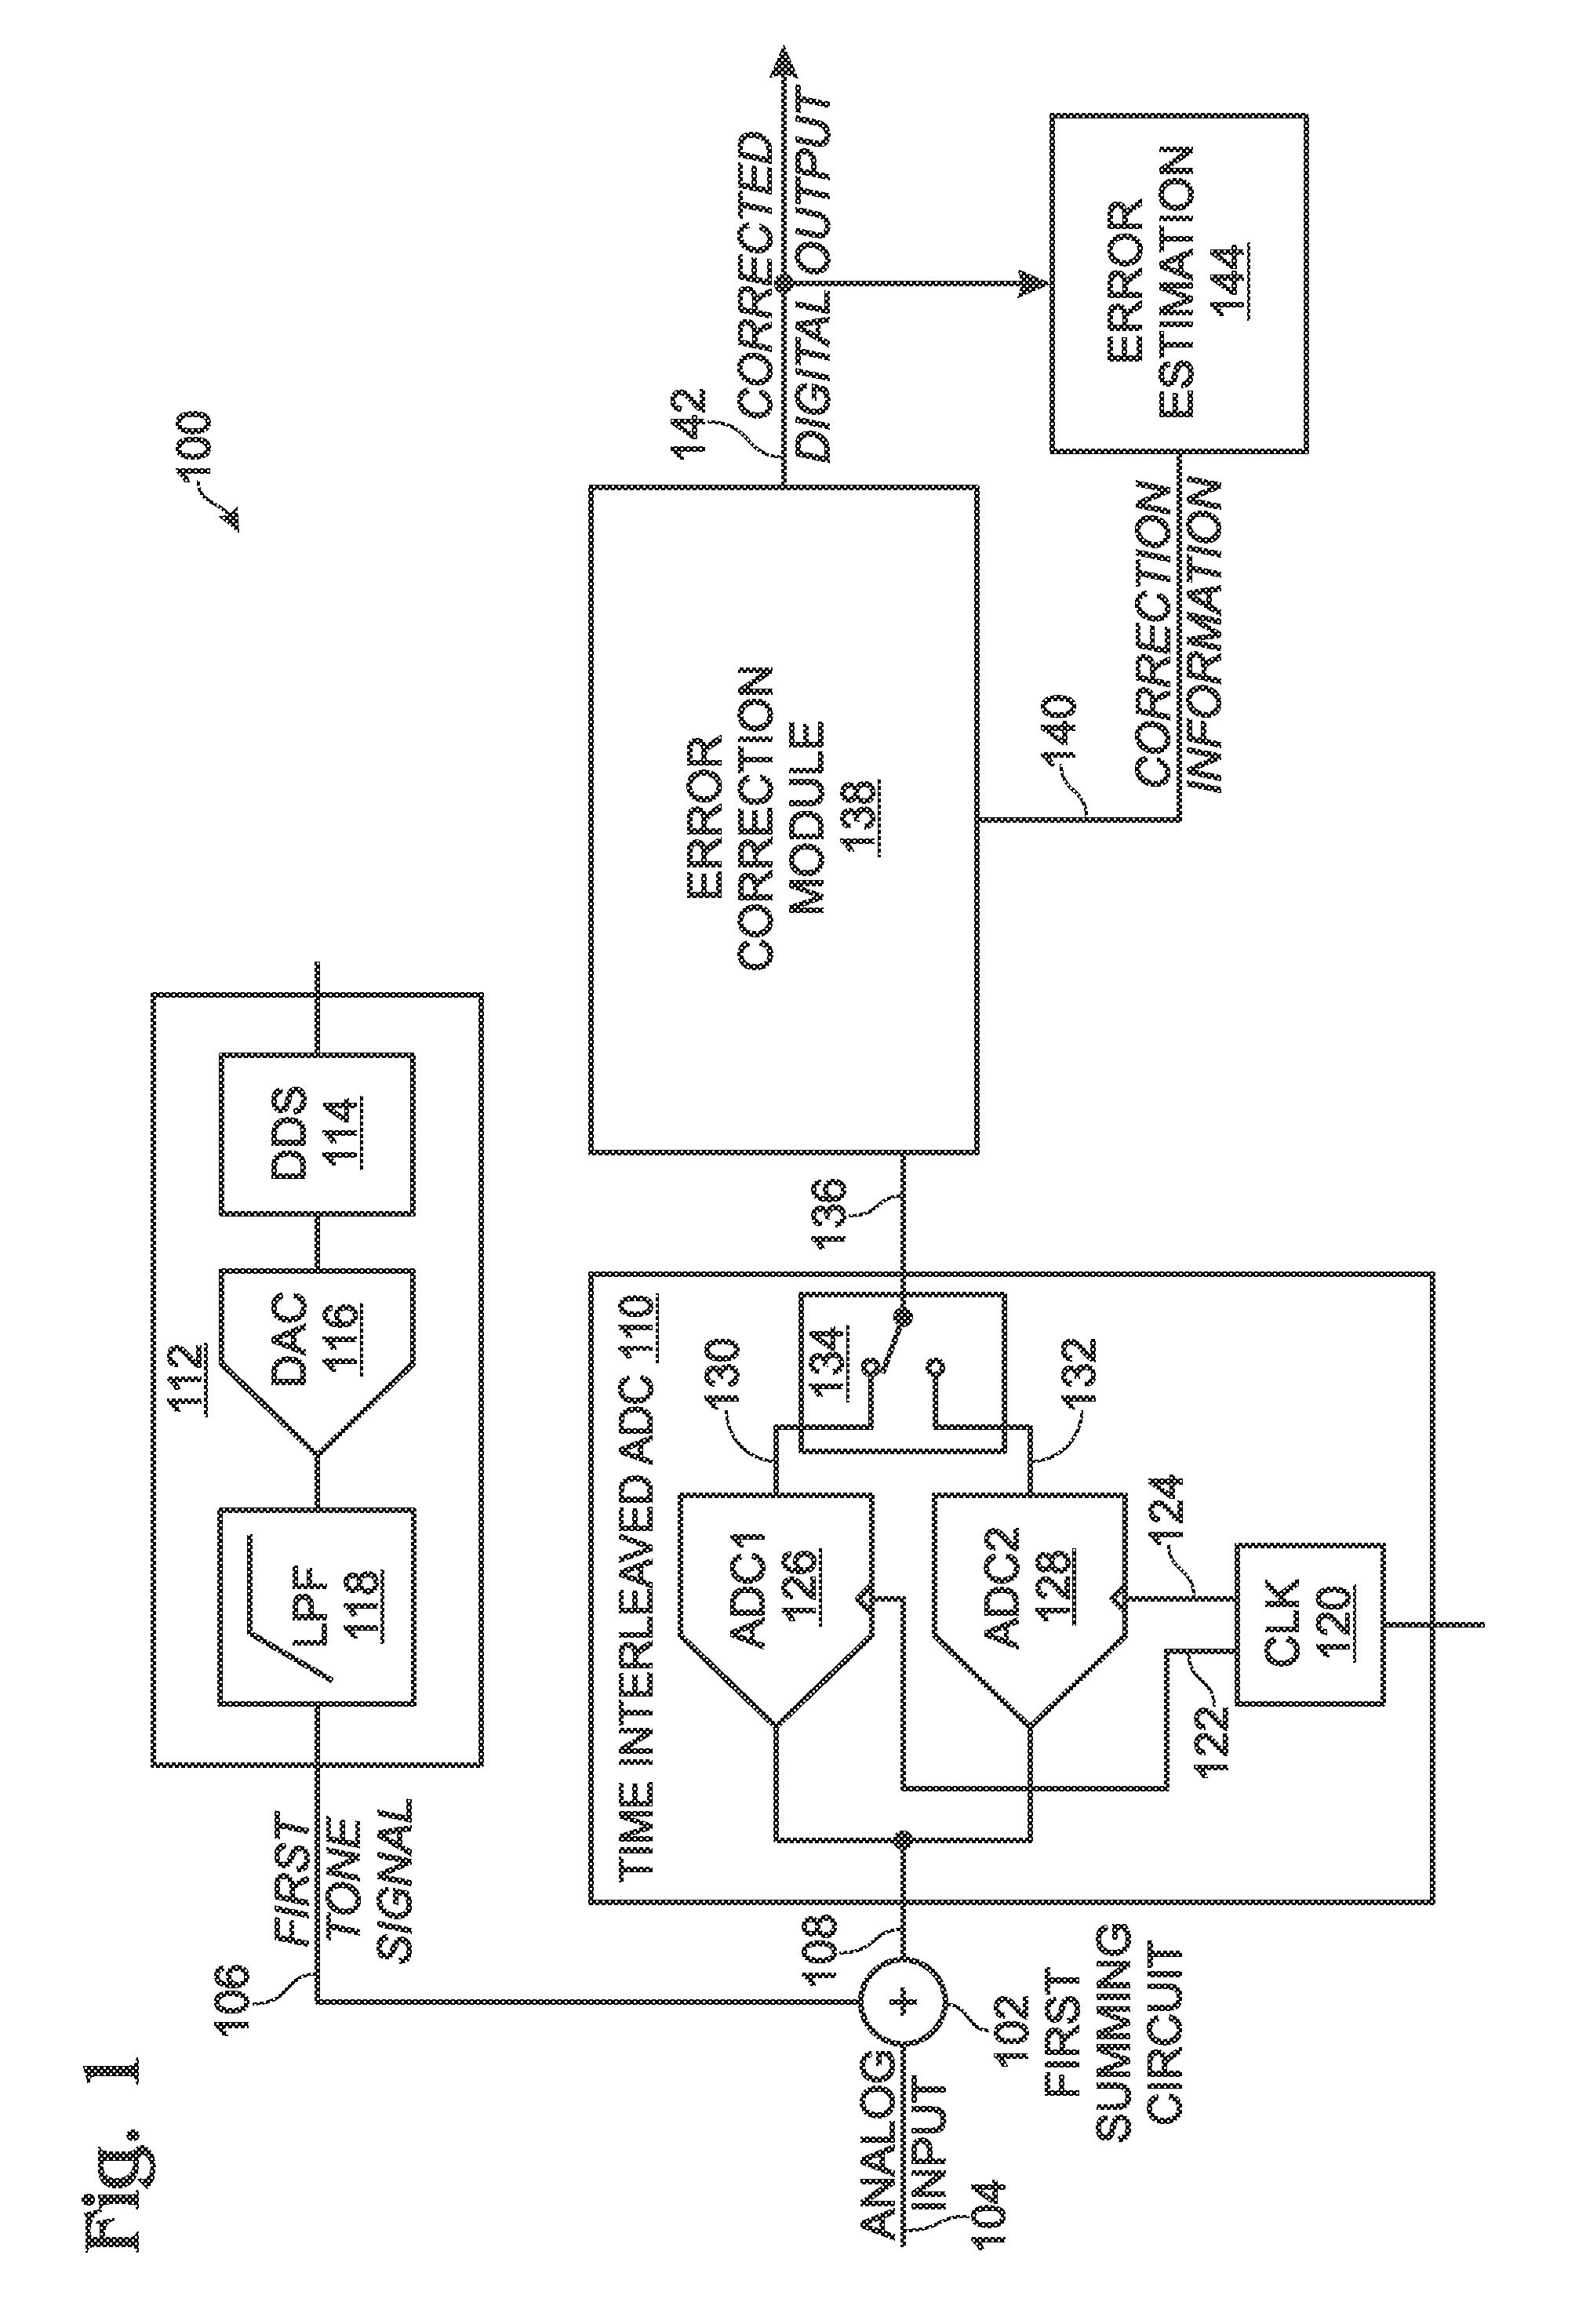 Interleaving analog-to-digital converter (ADC) with background calibration